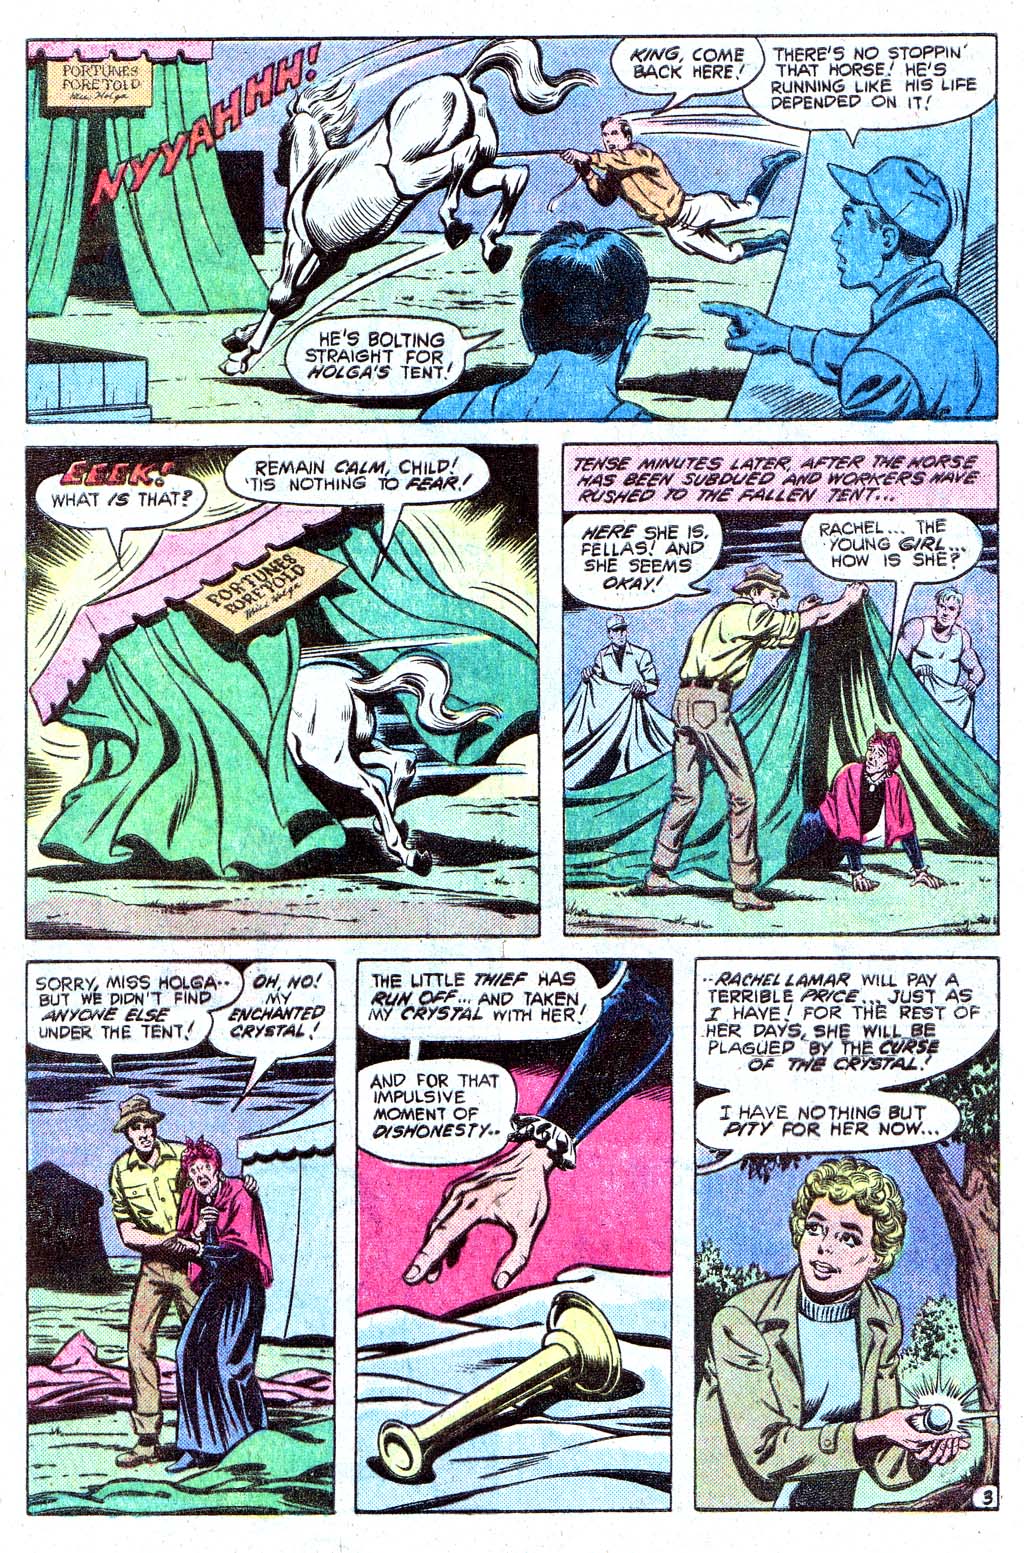 The New Adventures of Superboy 30 Page 4